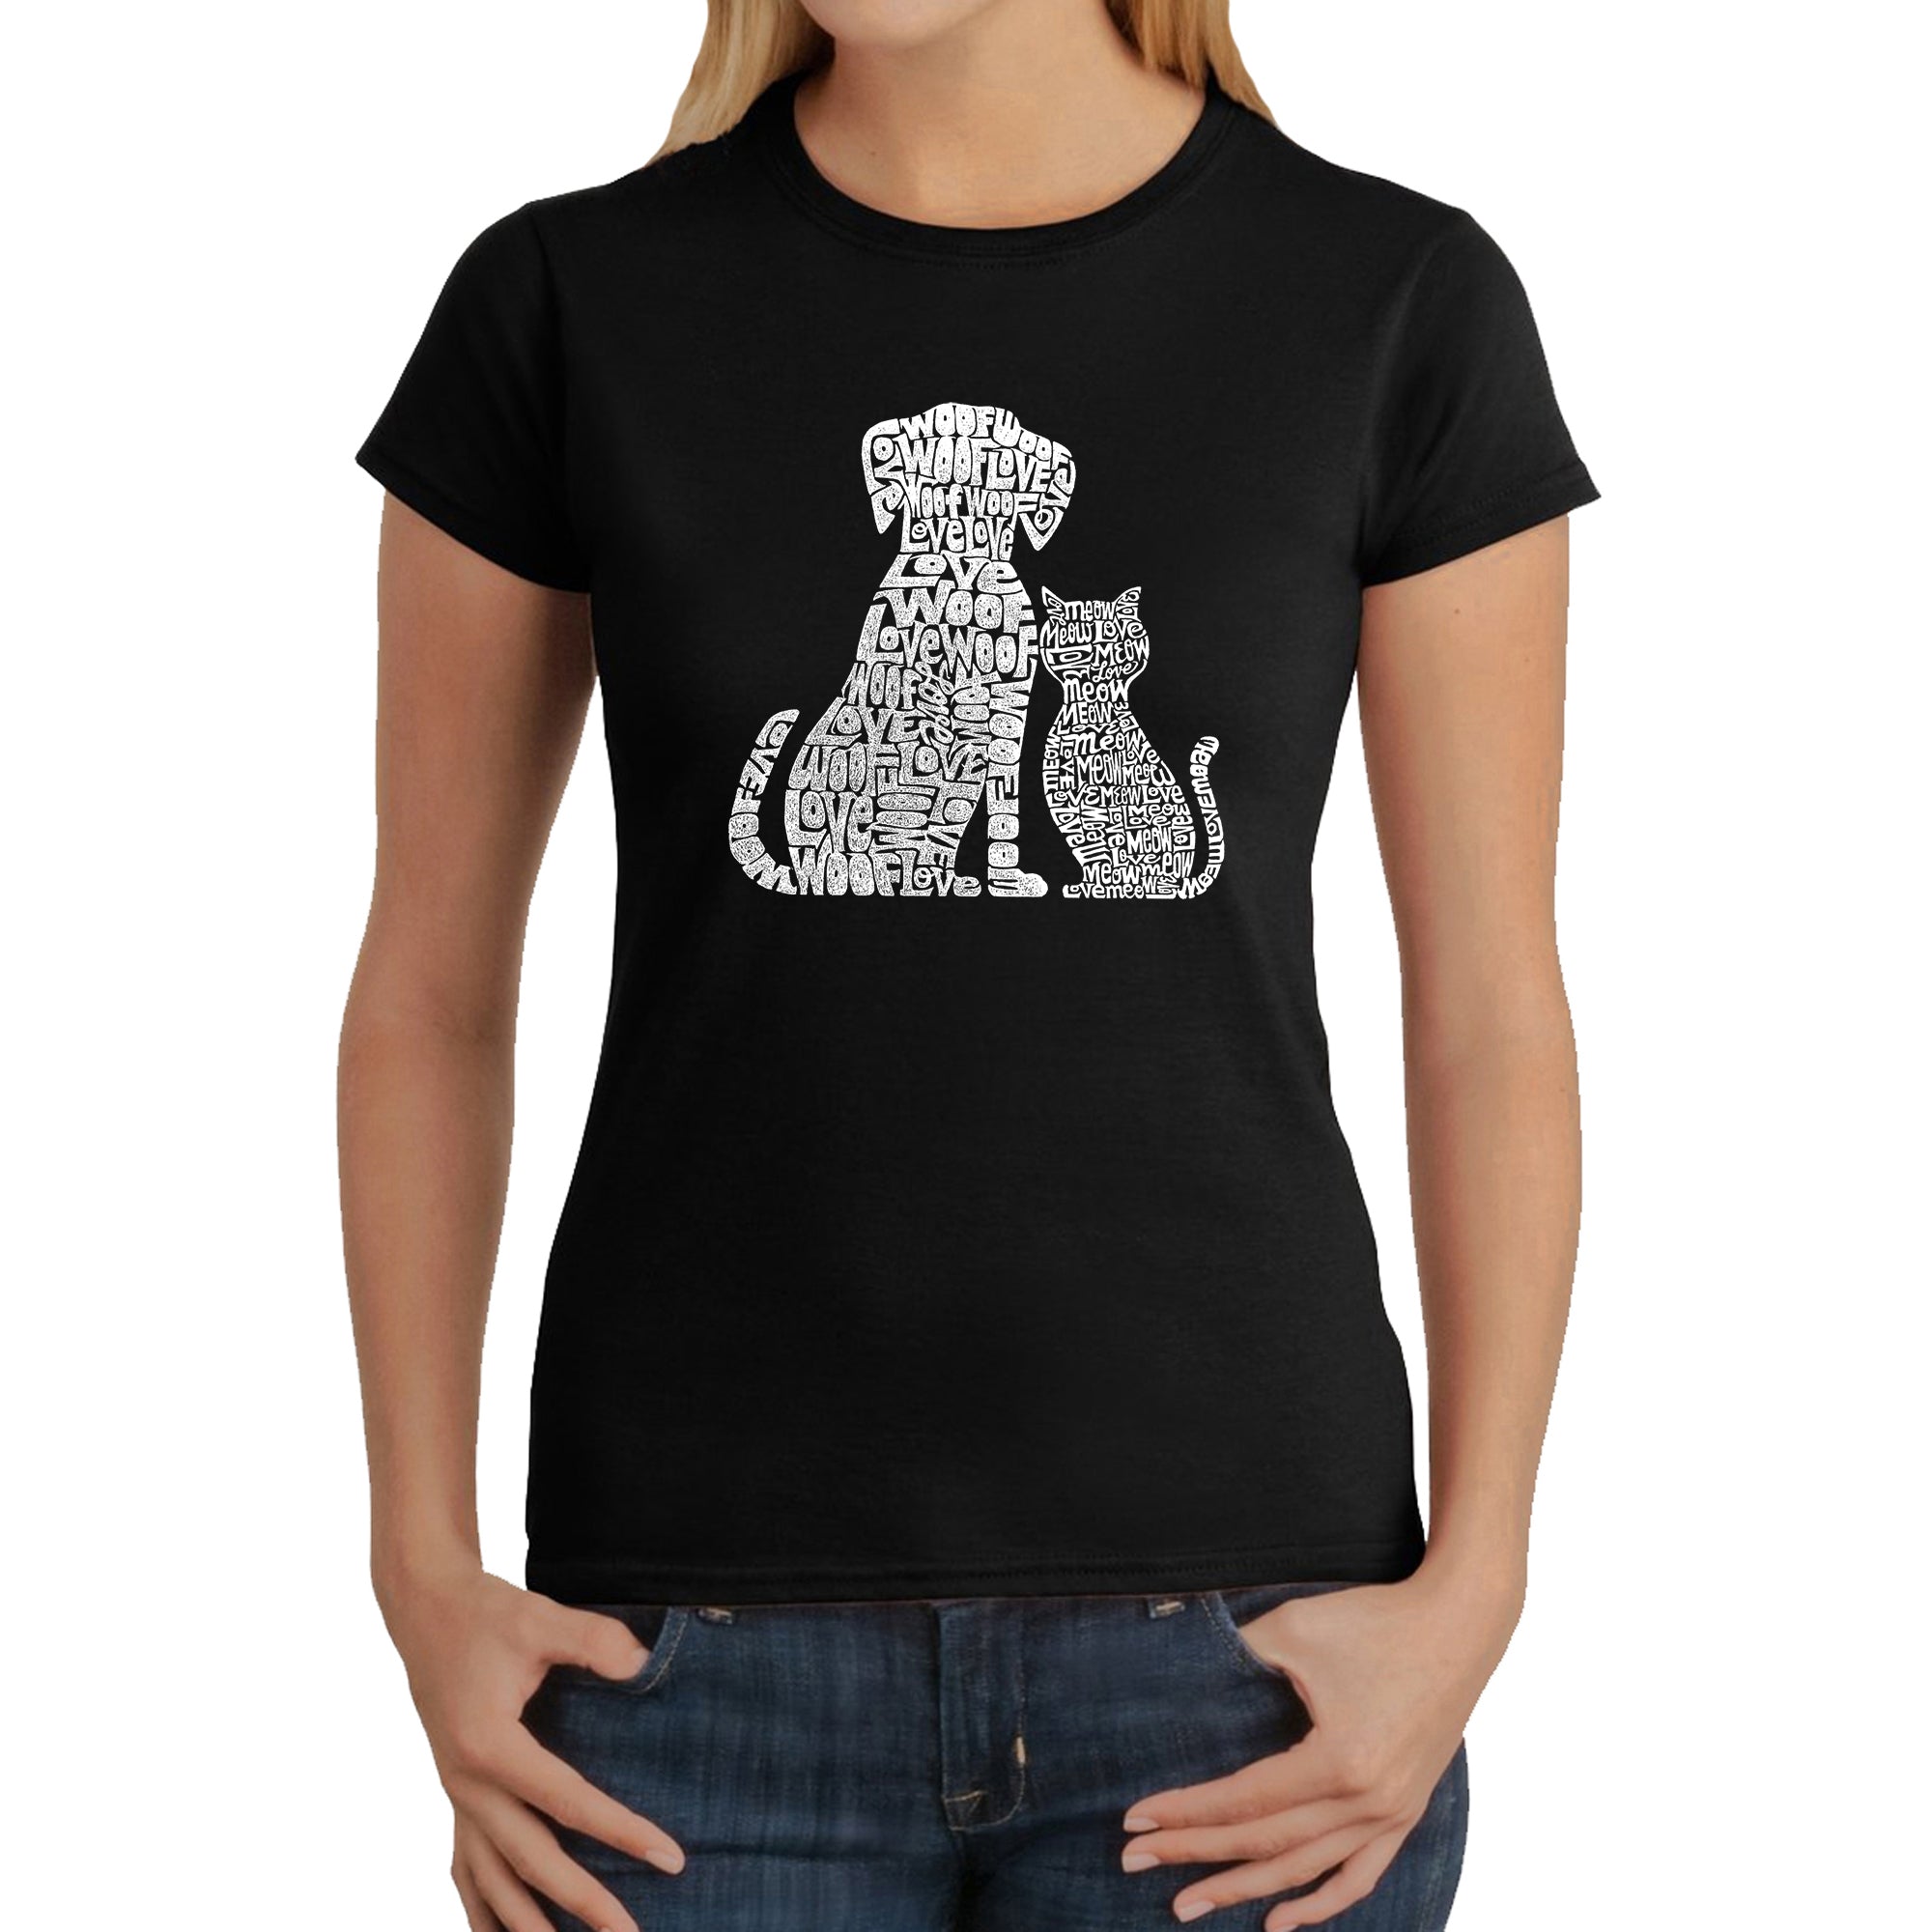 Dogs And Cats - Women's Word Art T-Shirt - Kelly - XX-Large